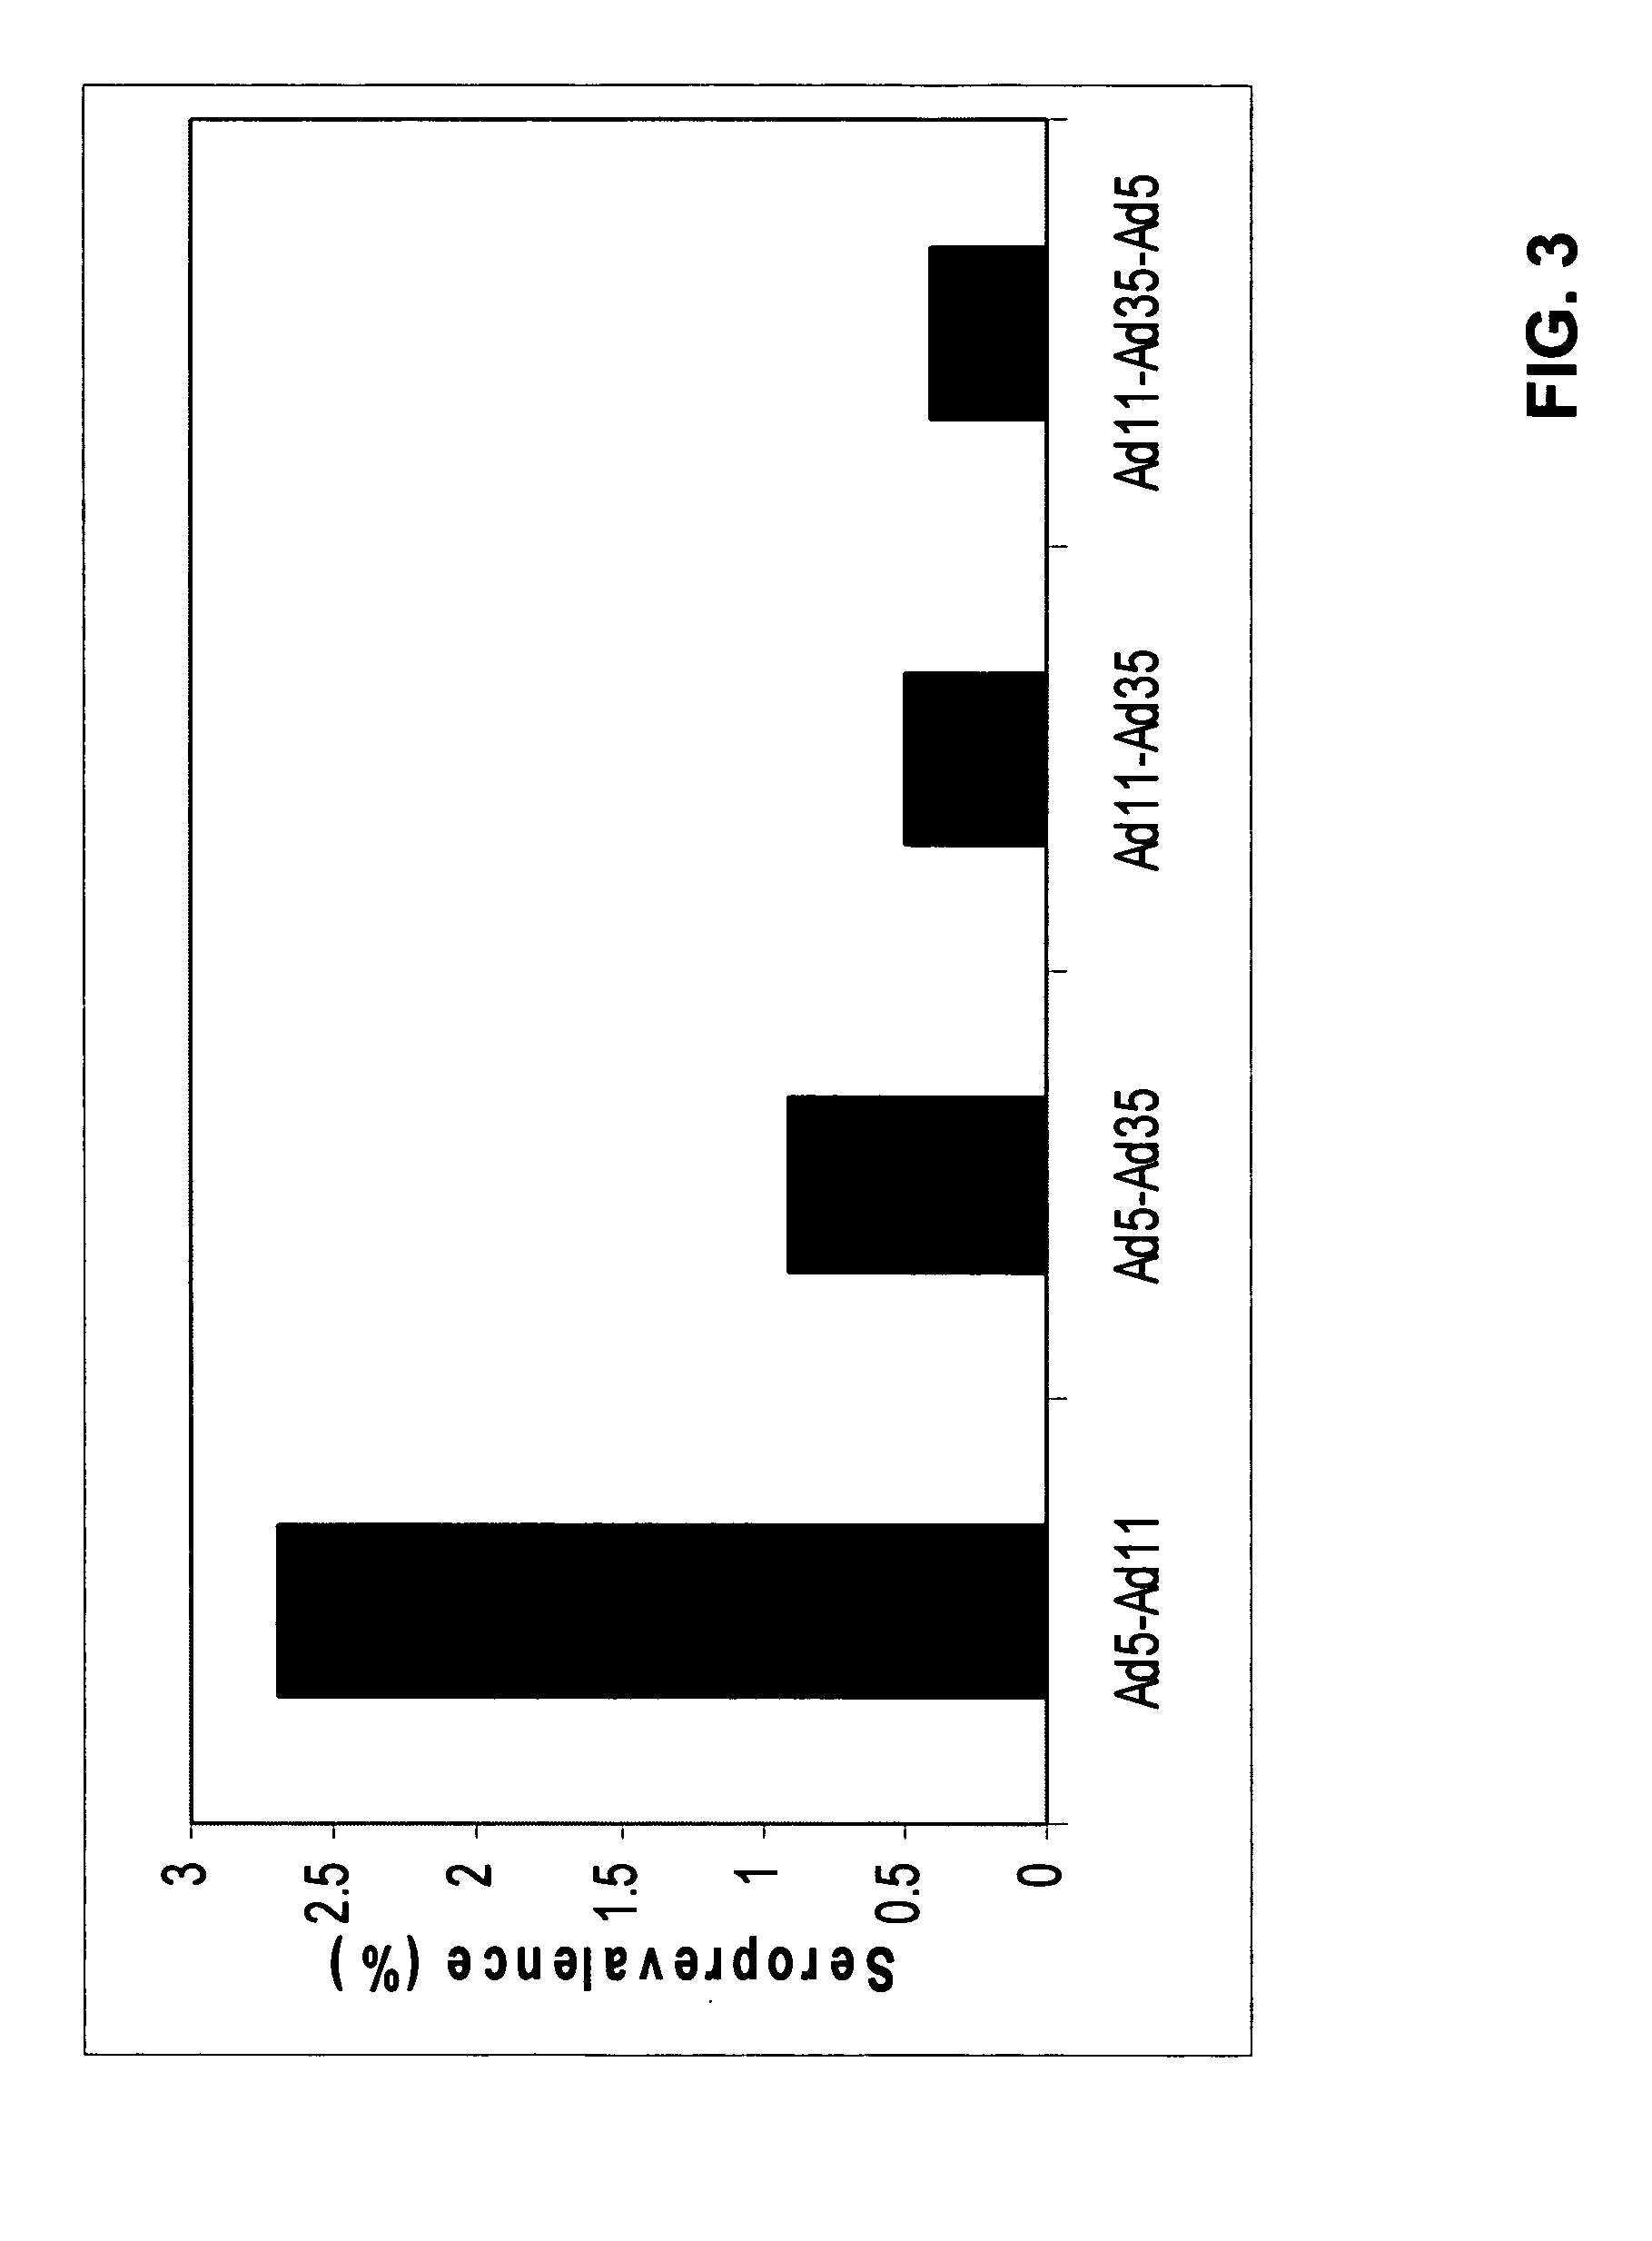 Settings for recombinant adenoviral-based vaccines